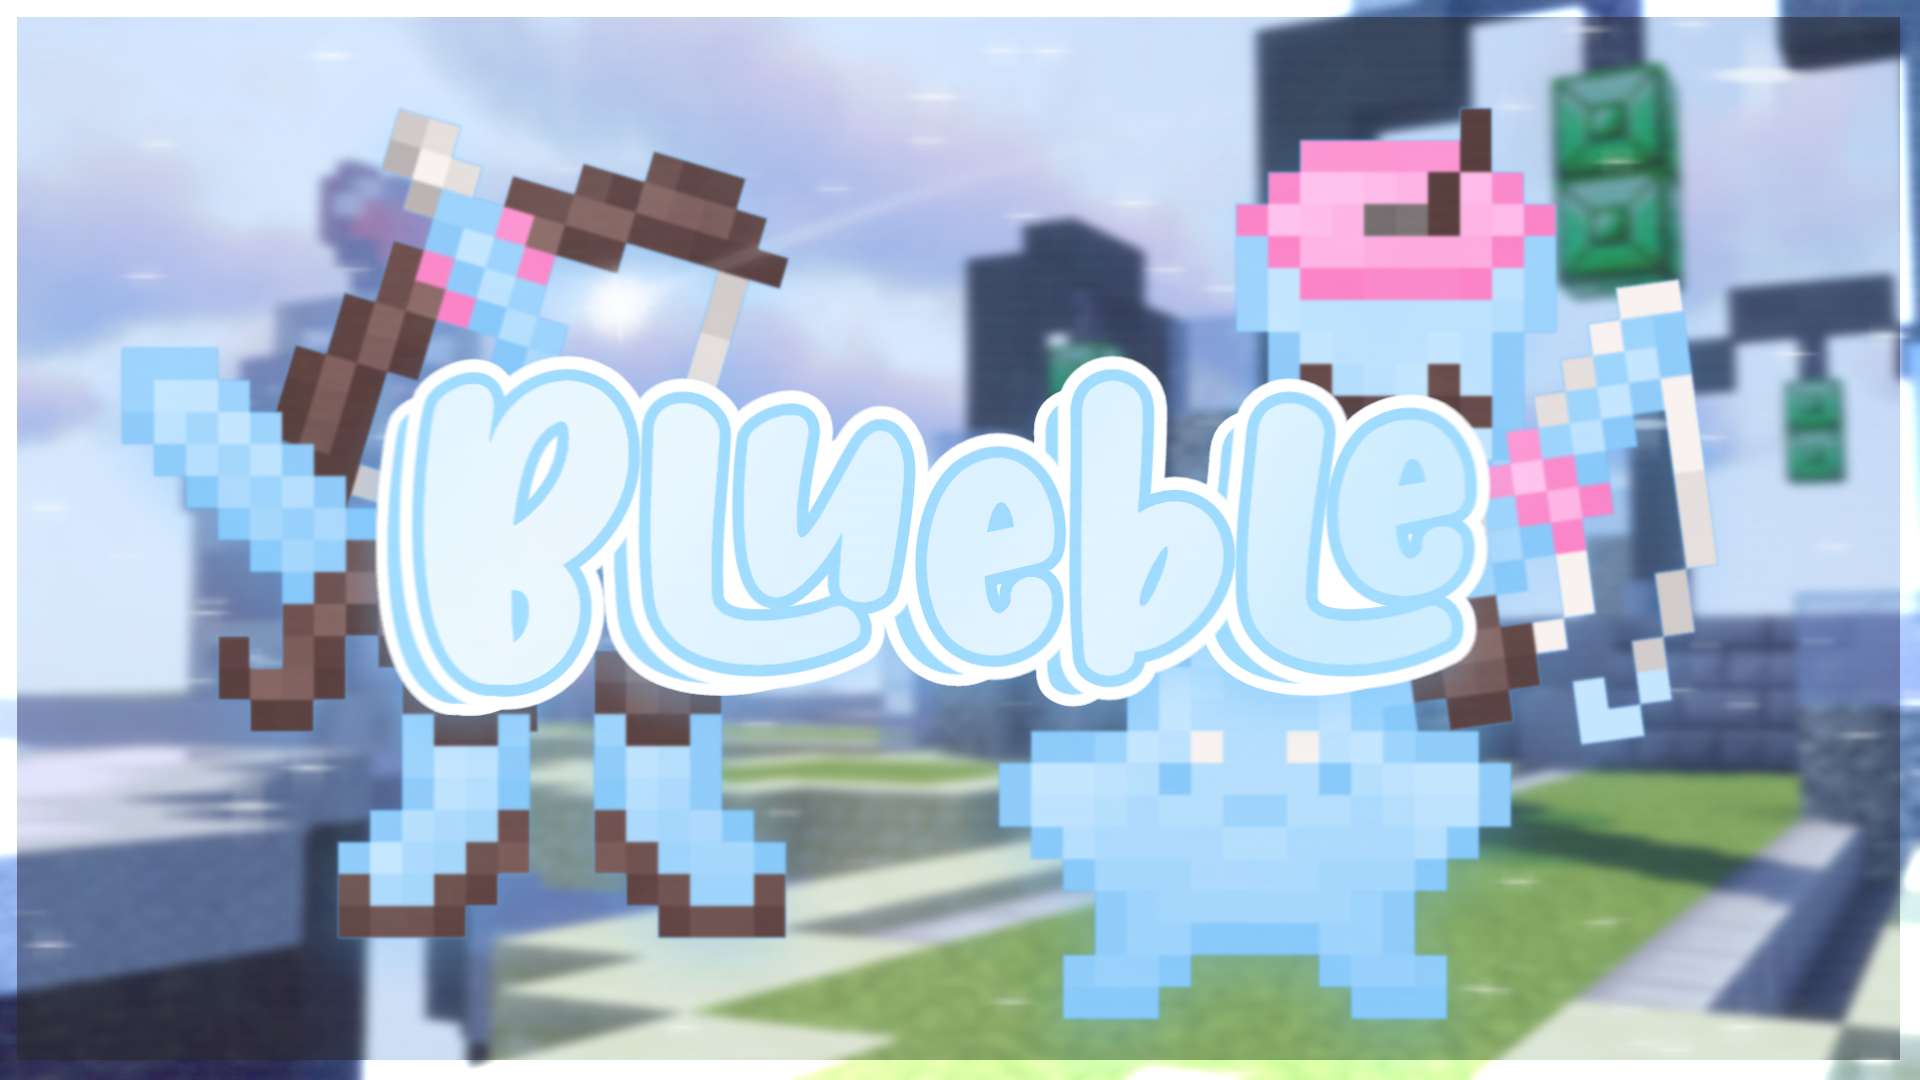 Blueble 16 by Juuliet on PvPRP